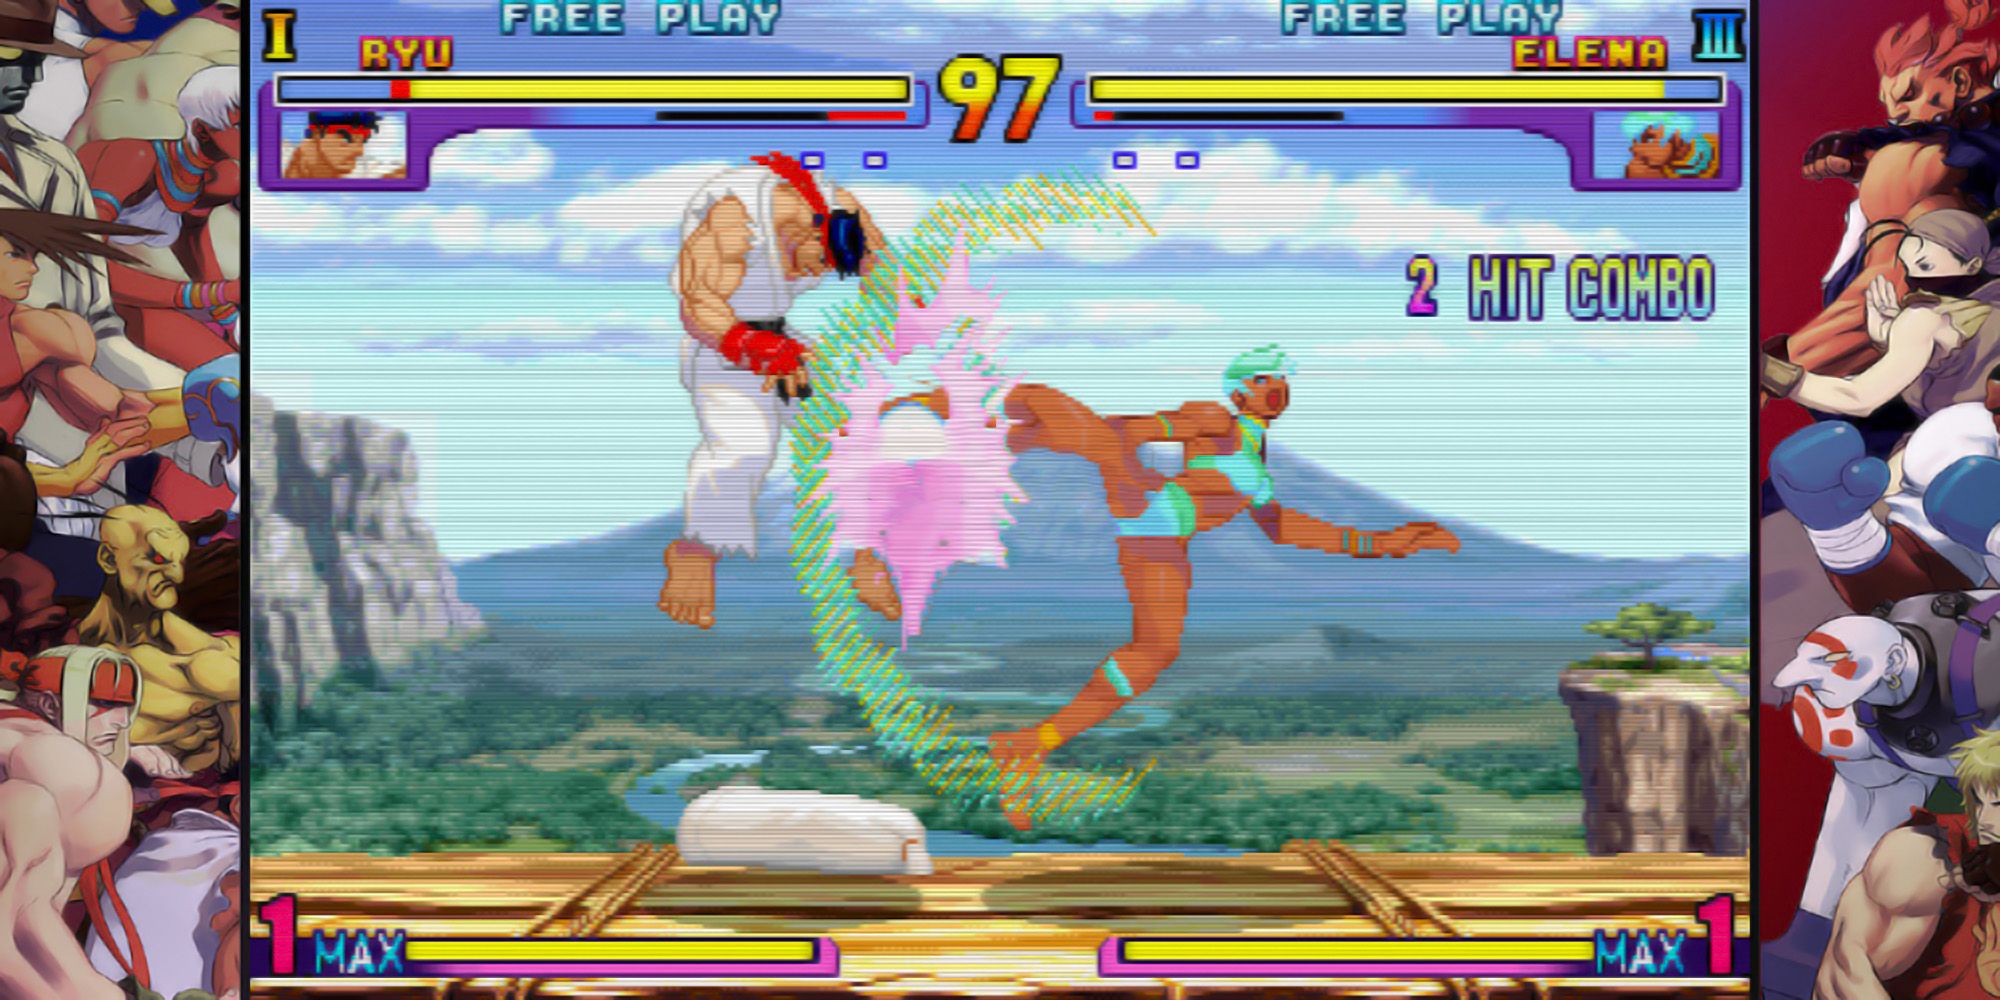 Elena flipkicks Ryu during a match in front of a mountain in Street Fighter 3: New Generation.